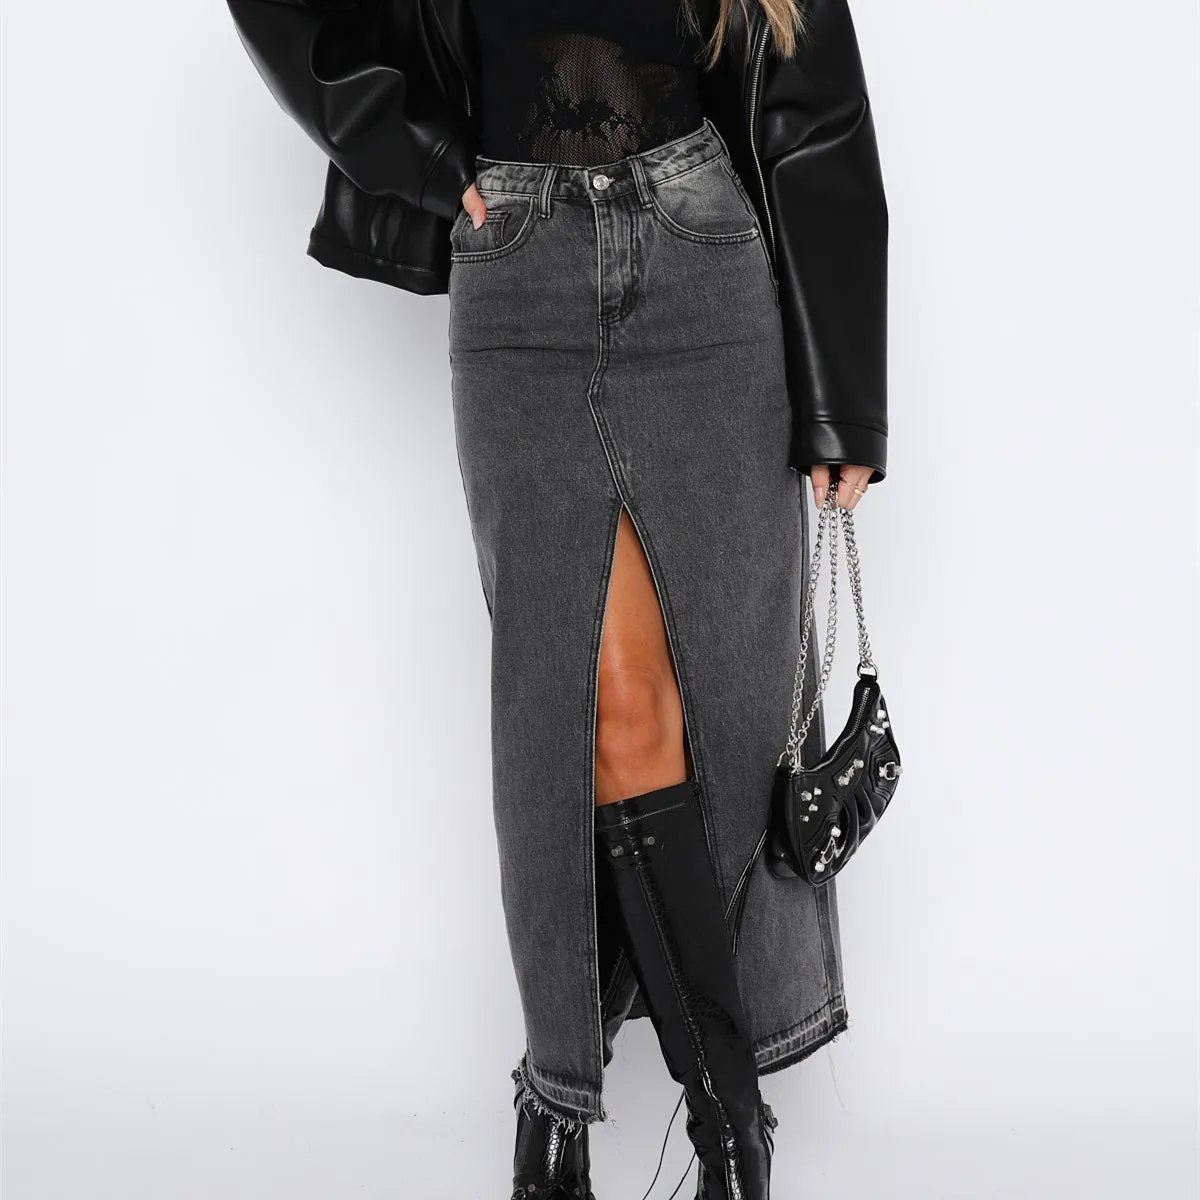 Women Denim Skirt Solid Color Casual Elastic Split Skirt for Beaches Club Streetwear Aesthetic Clothes